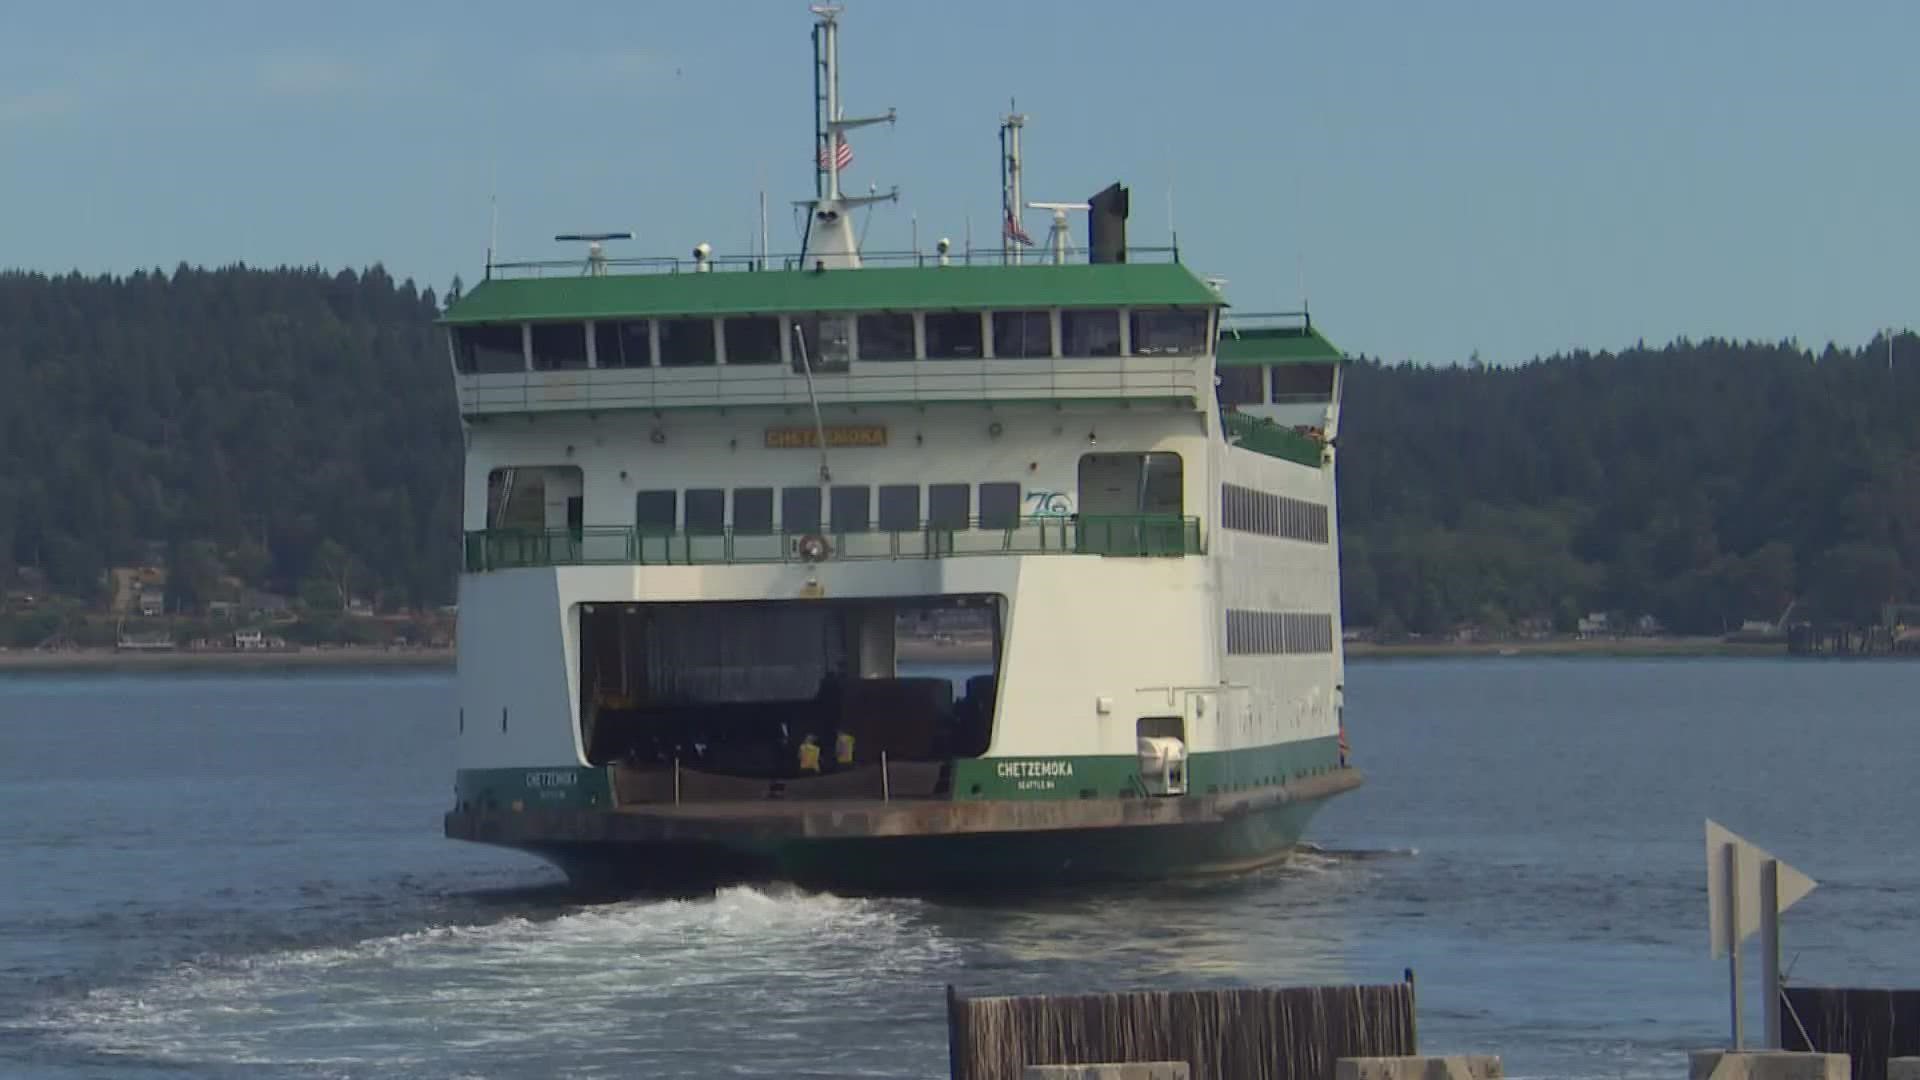 Washington State Ferries is continuing to shift boats and staff around amid a difficult staffing shortage that has left many industries crippled, especially those in